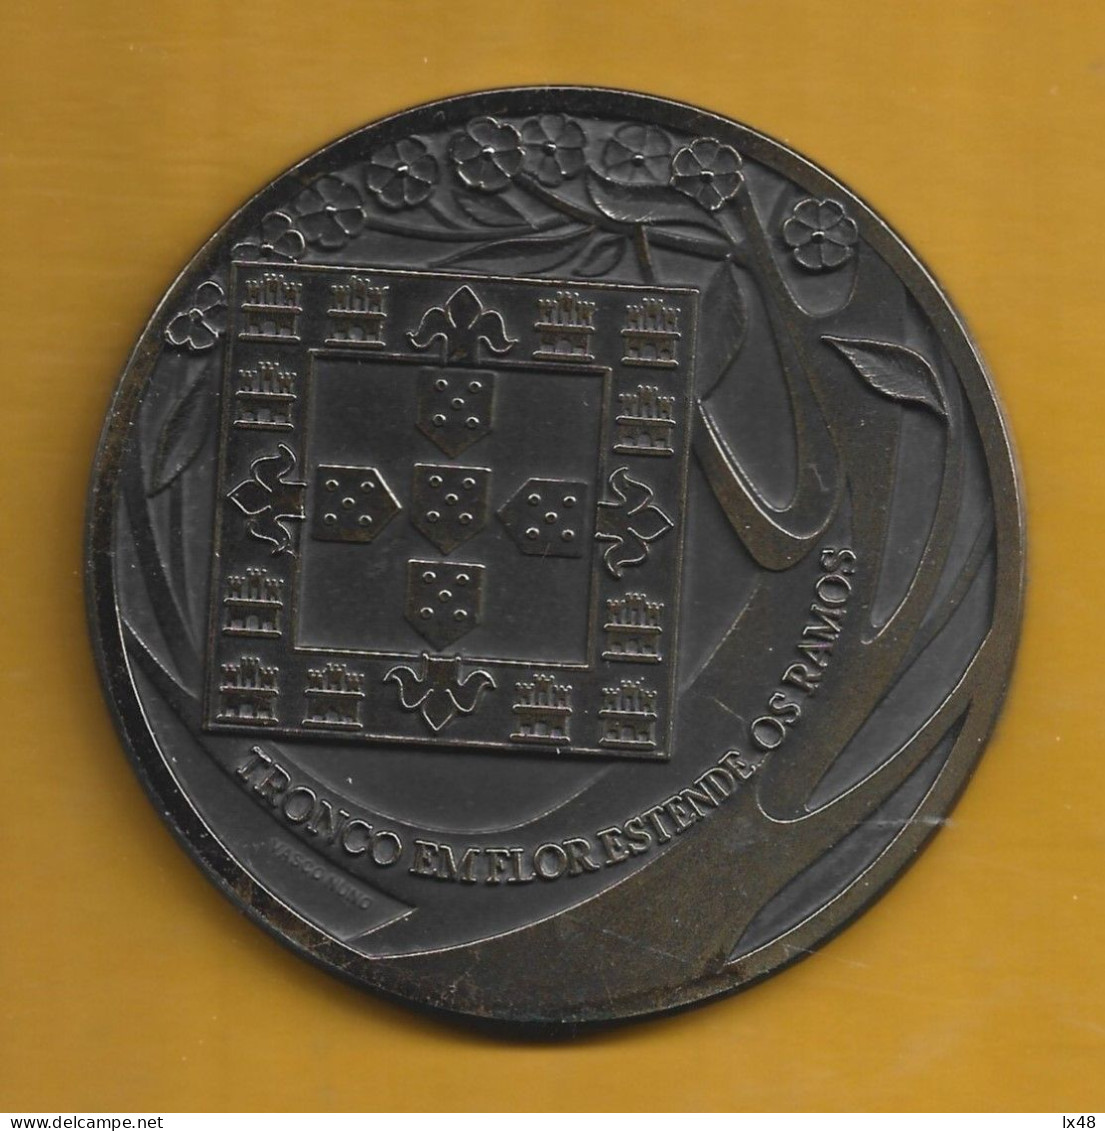 Mocidade Portuguesa. Portuguese Youth. Bronze Medal For 80th Years Of Portuguese Youth Foundation 1936/201. Portugiesisc - Gewerbliche